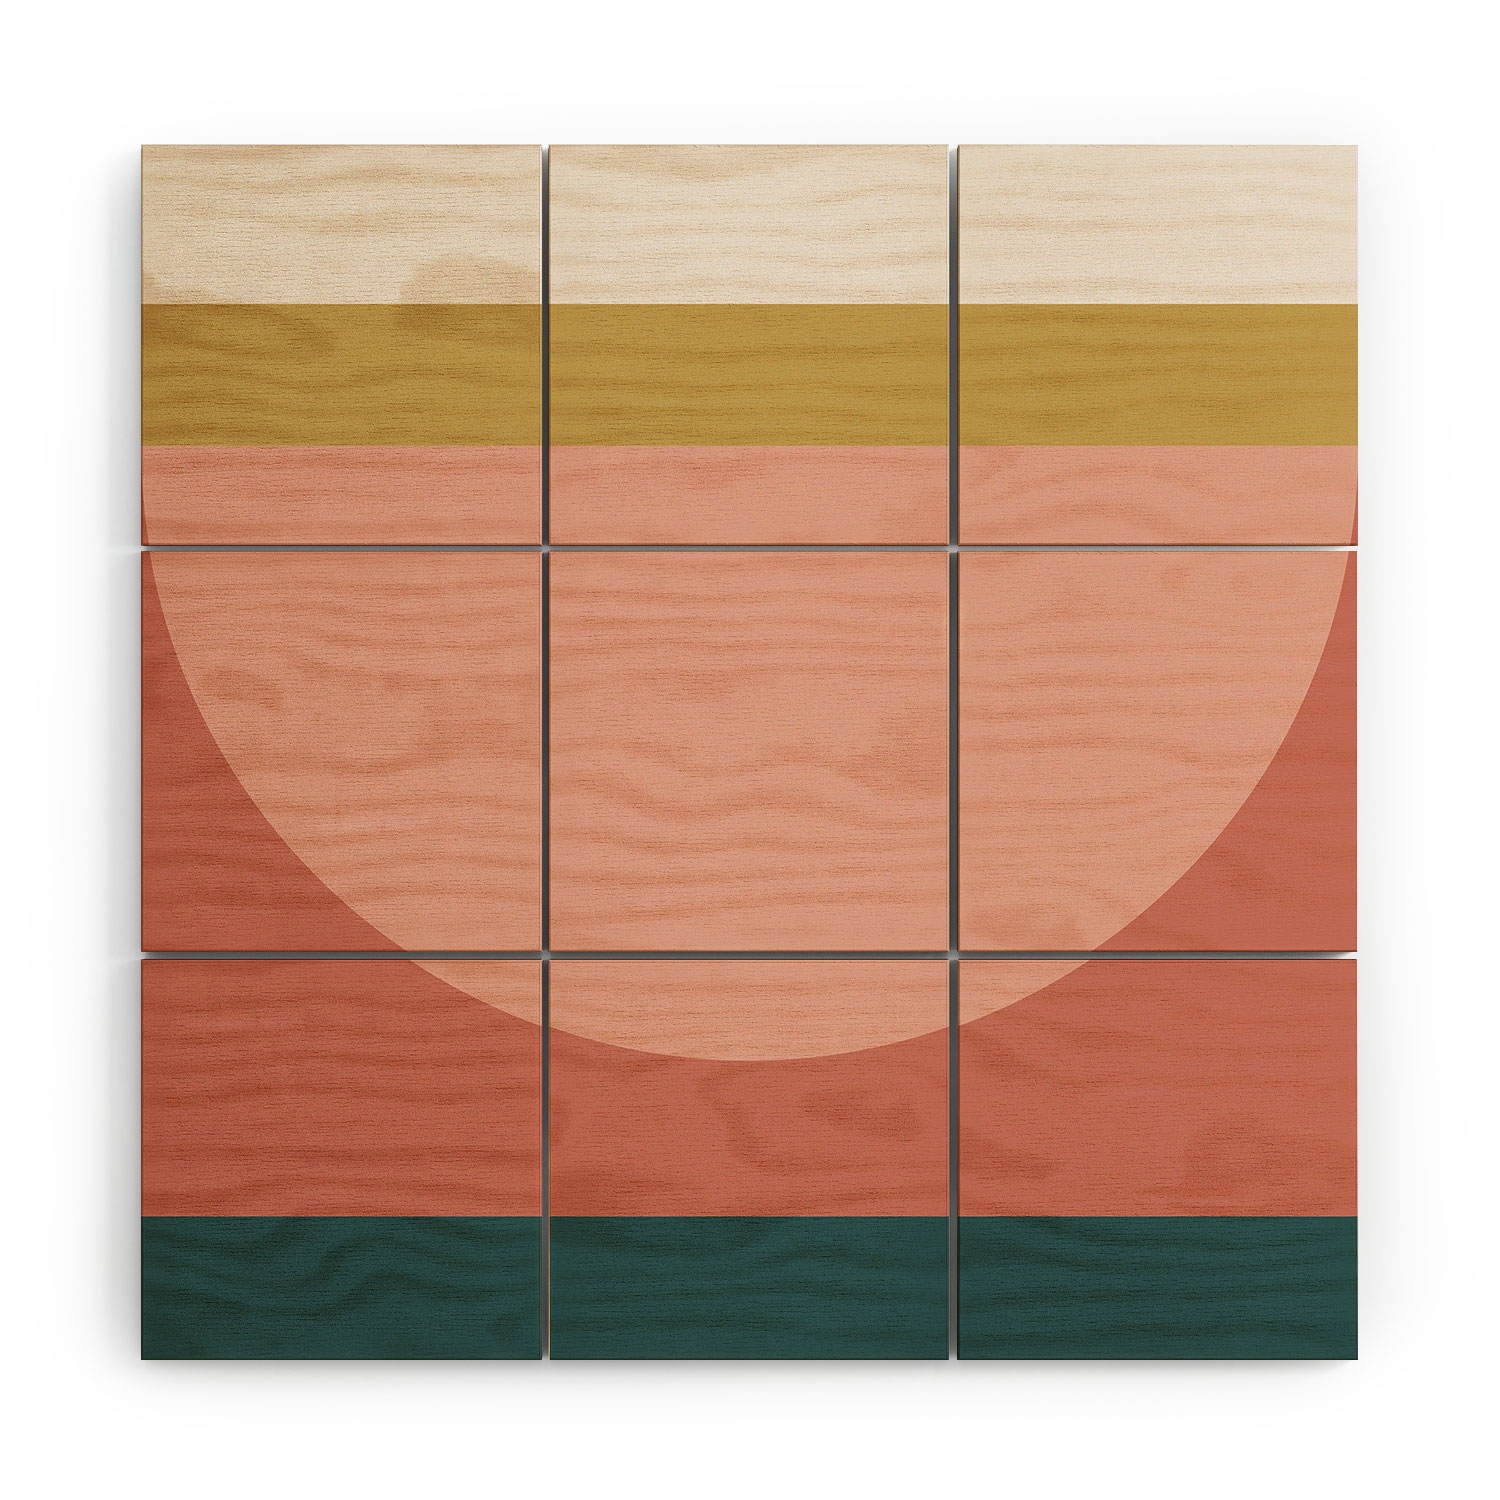 Maximalist Geometric 03 by The Old Art Studio - Wood Wall Mural3' X 3' (Nine 12" Wood Squares) - Image 3